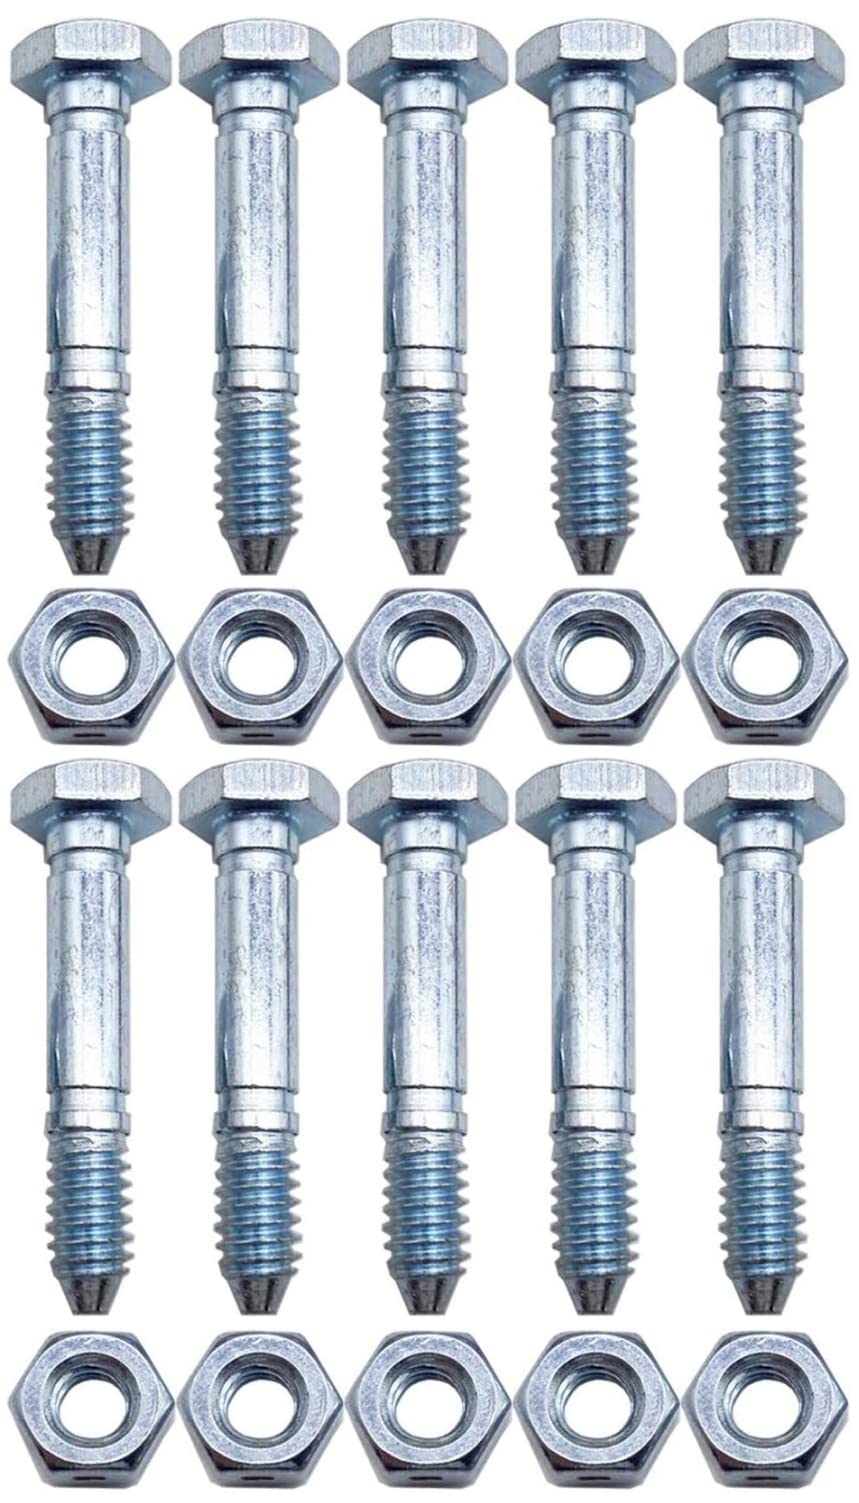 RTPOWER for 53200500 Snow Blower Shear Bolt 10 Pack Replaces 510016